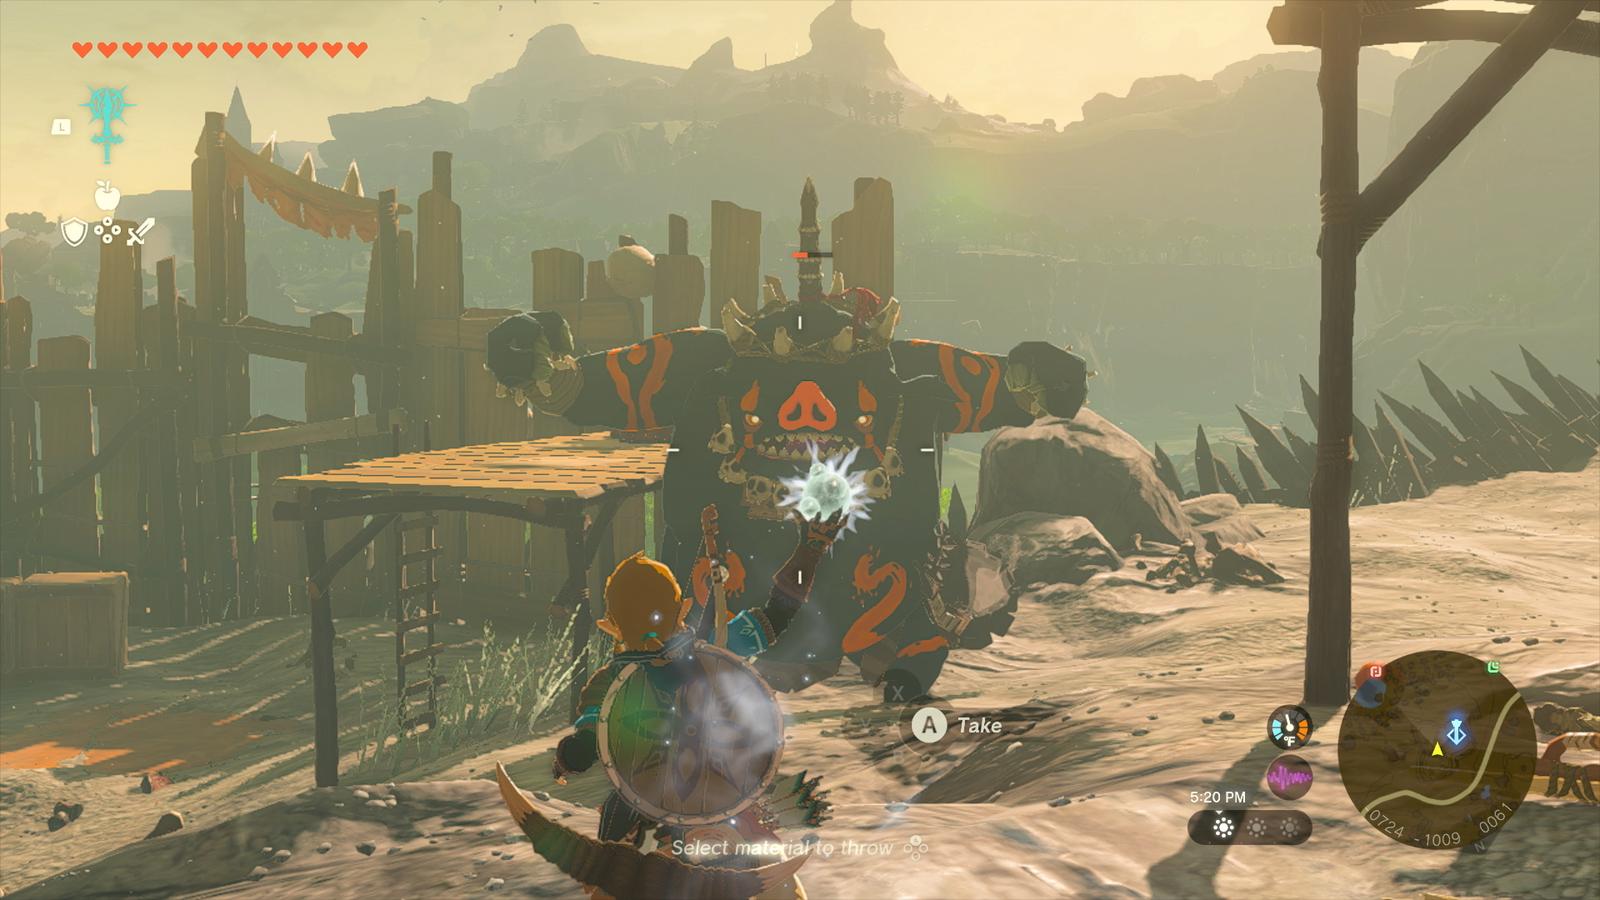 Zelda: Breath of the Wild winning Game of the Year at The Game